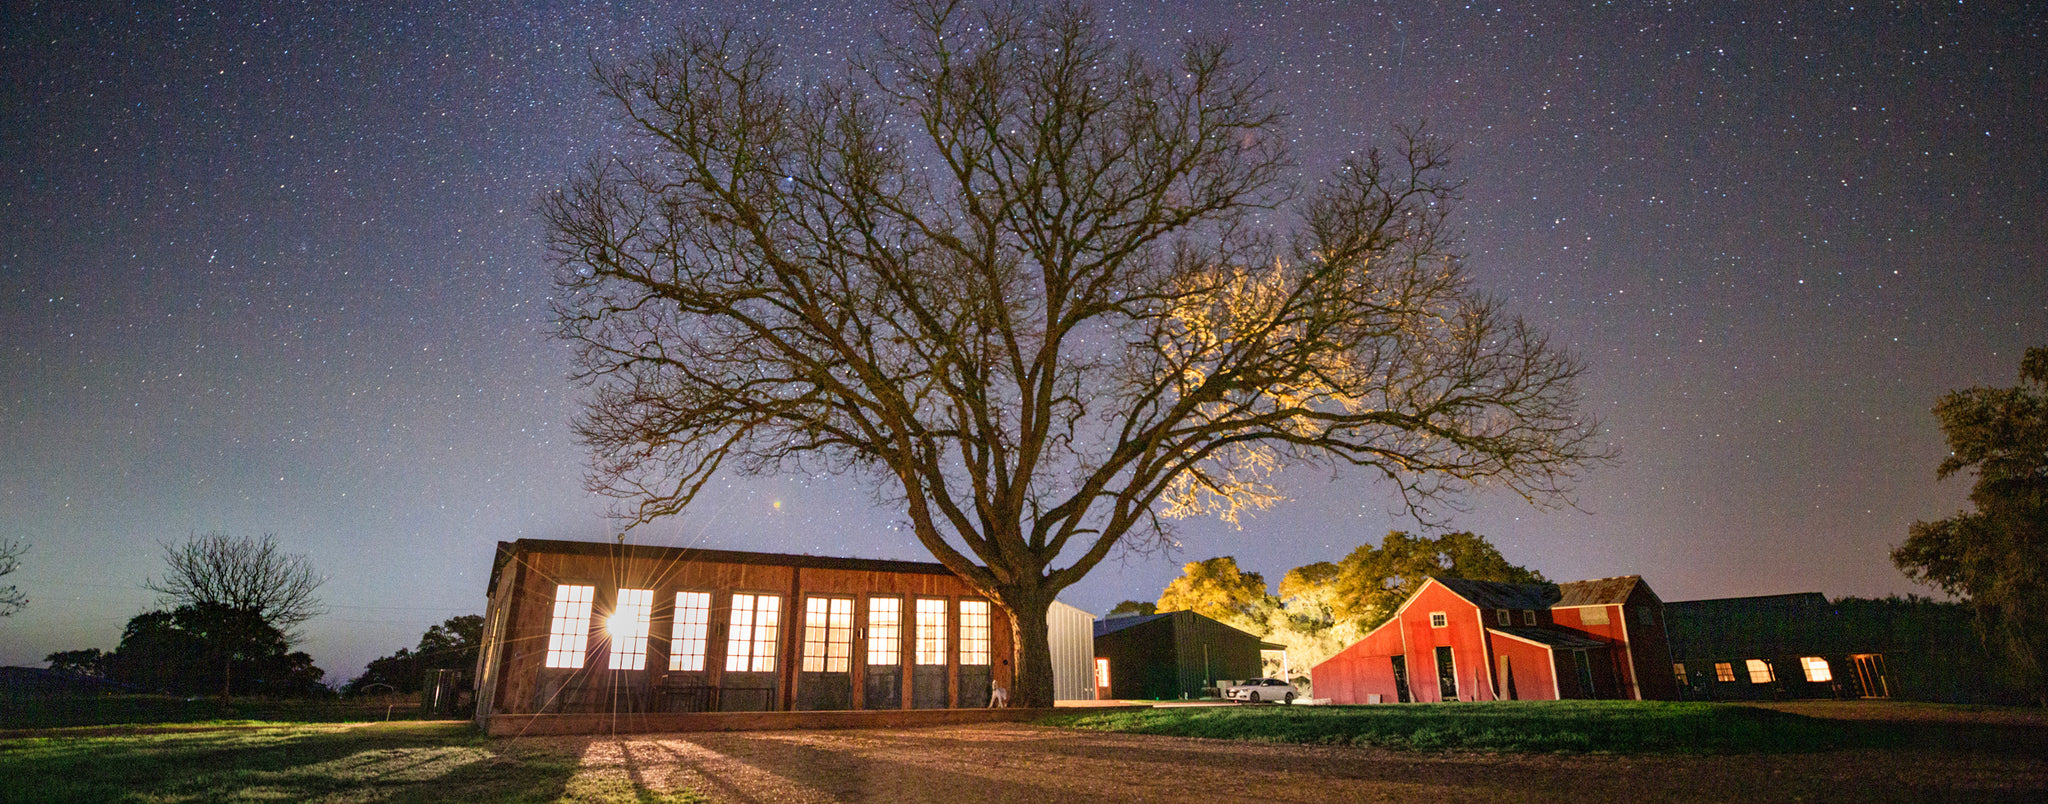 night shot of a remodeled red barn and a large tree in the center